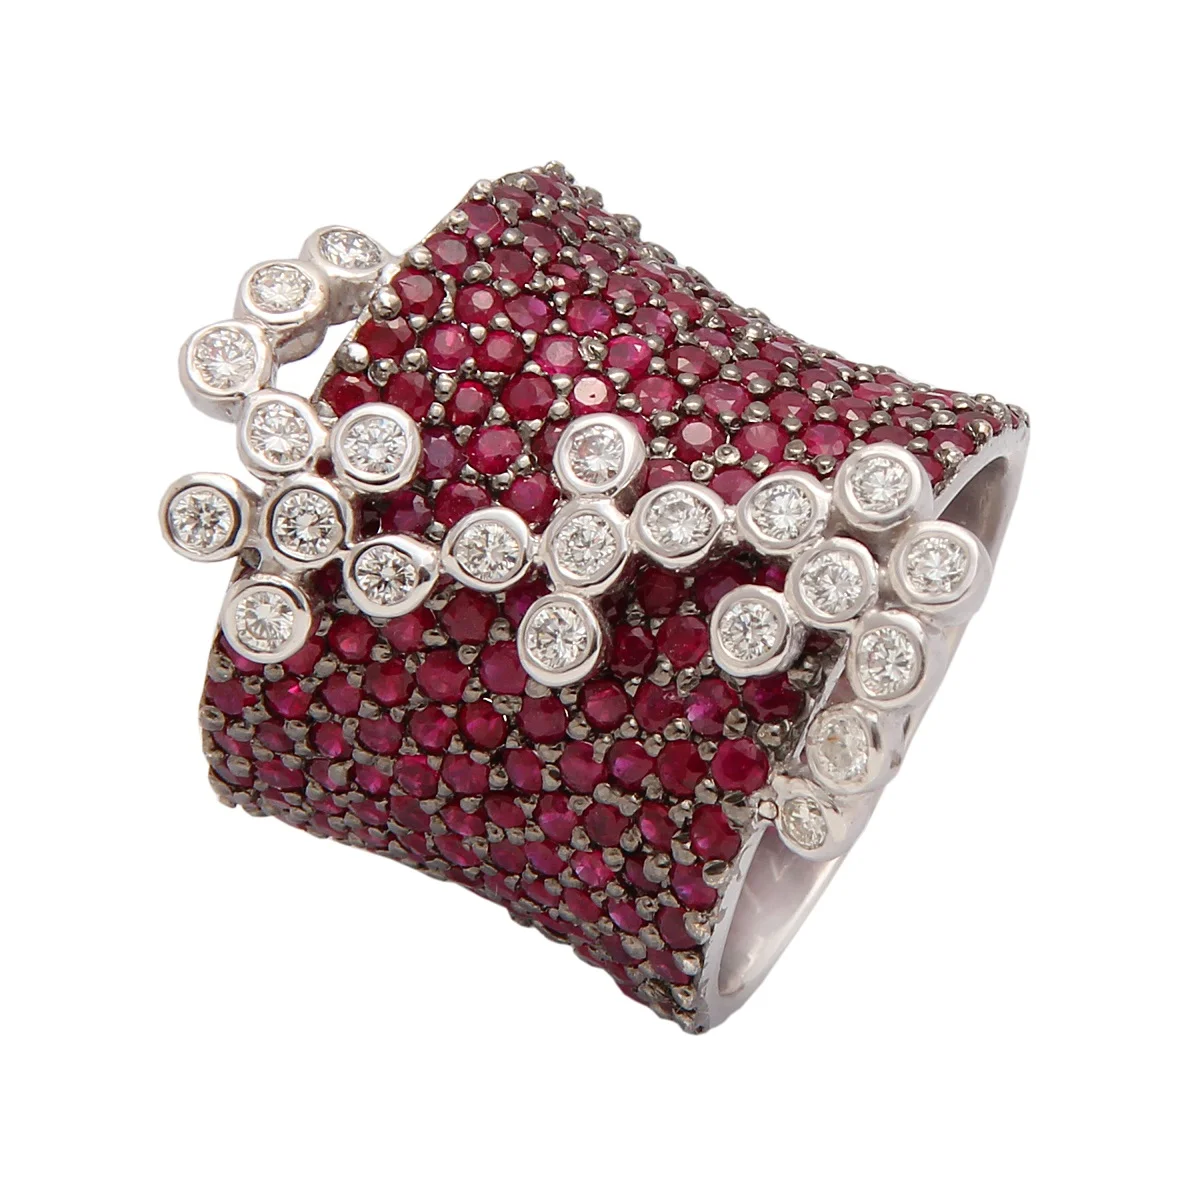 Rare And Red Rubies - The July Birthstone